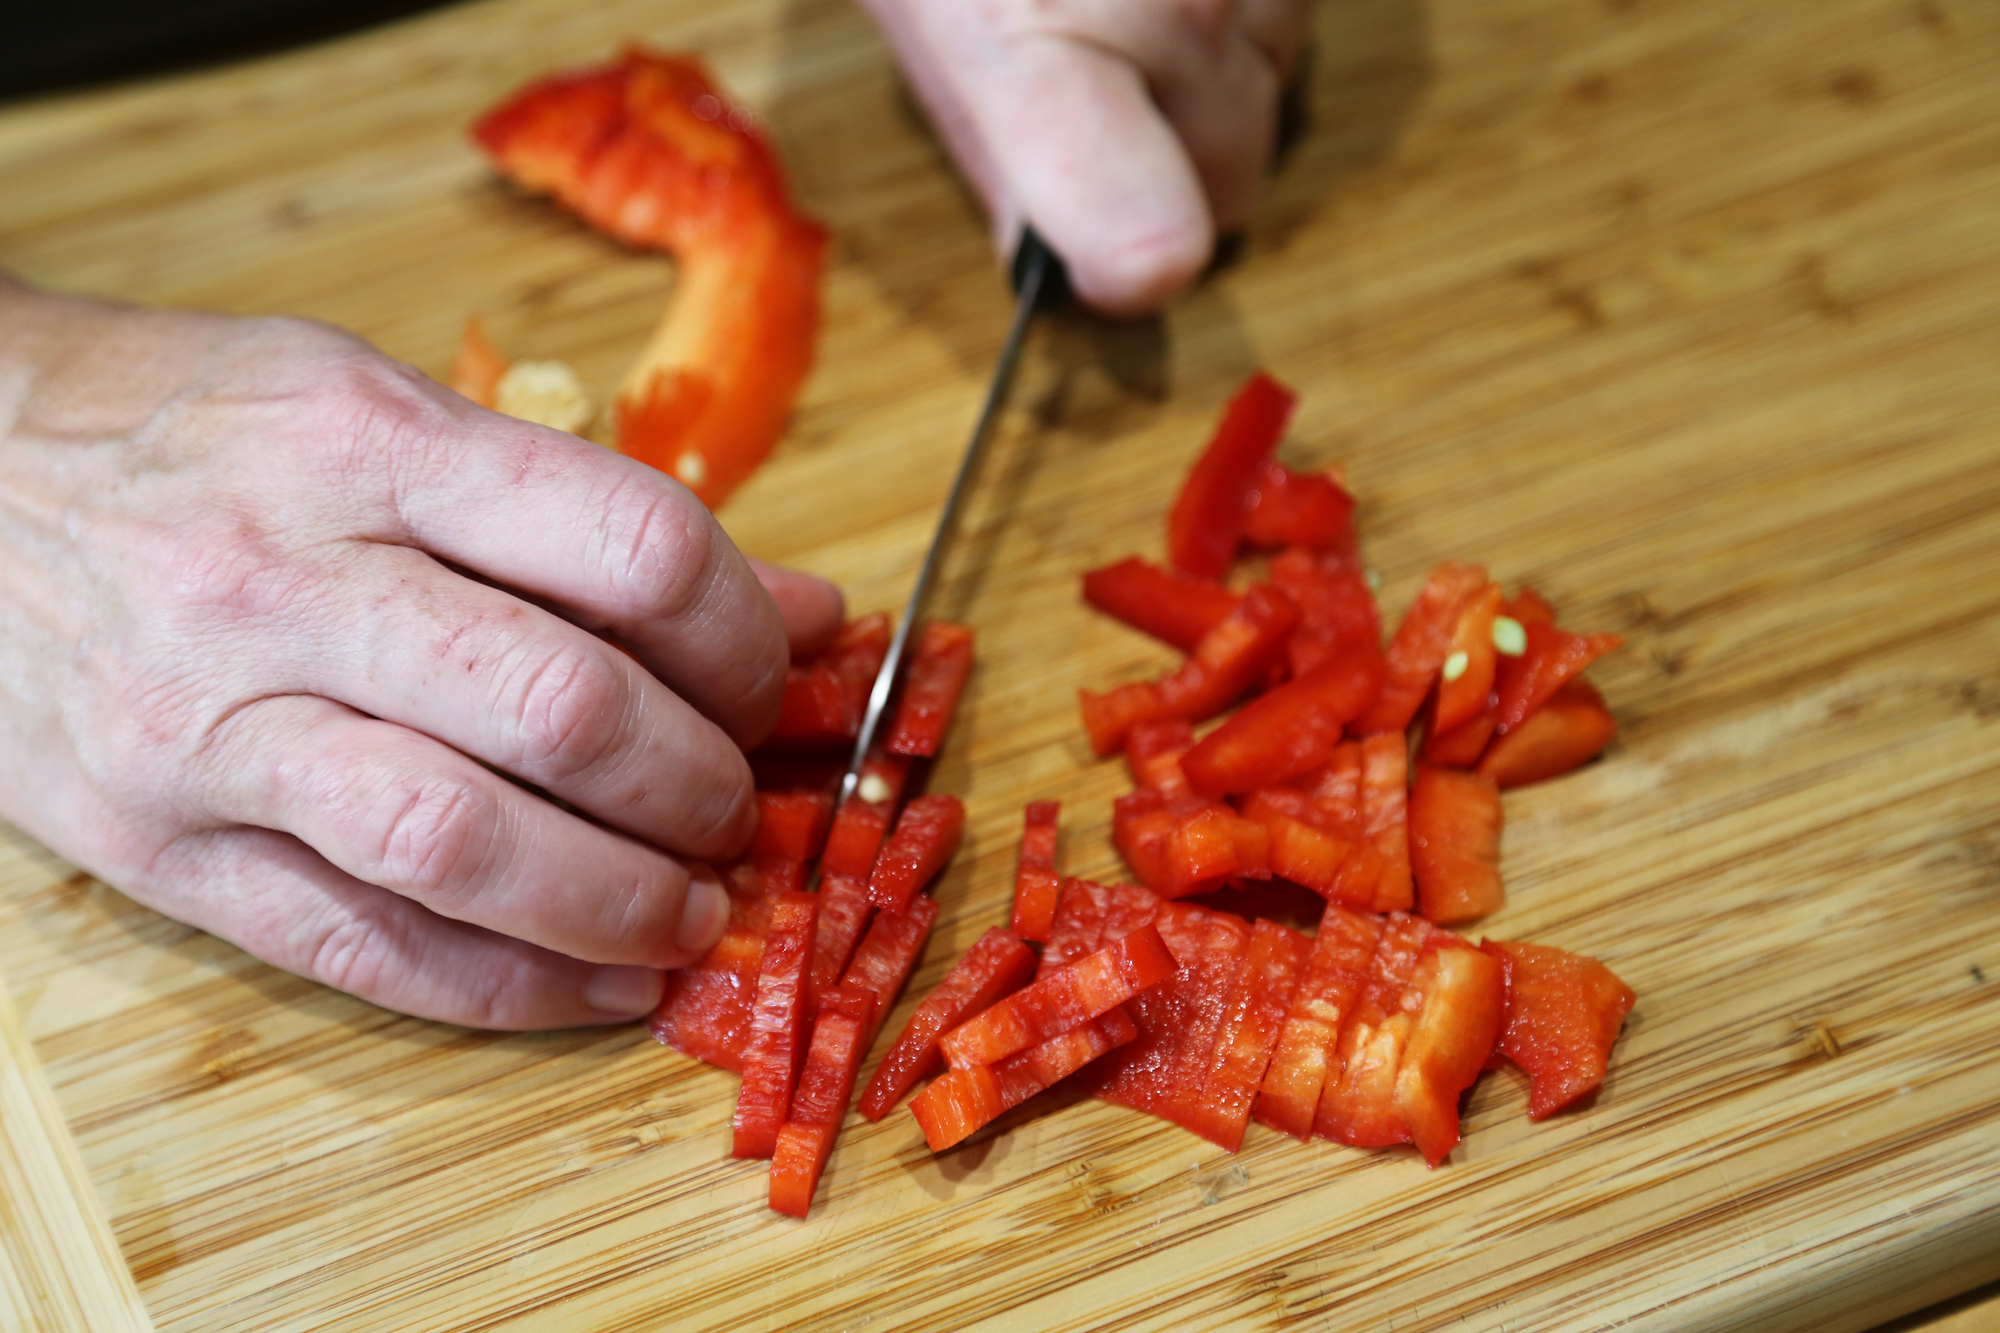 Seed and cut red bell pepper into thin 1-inch strips.